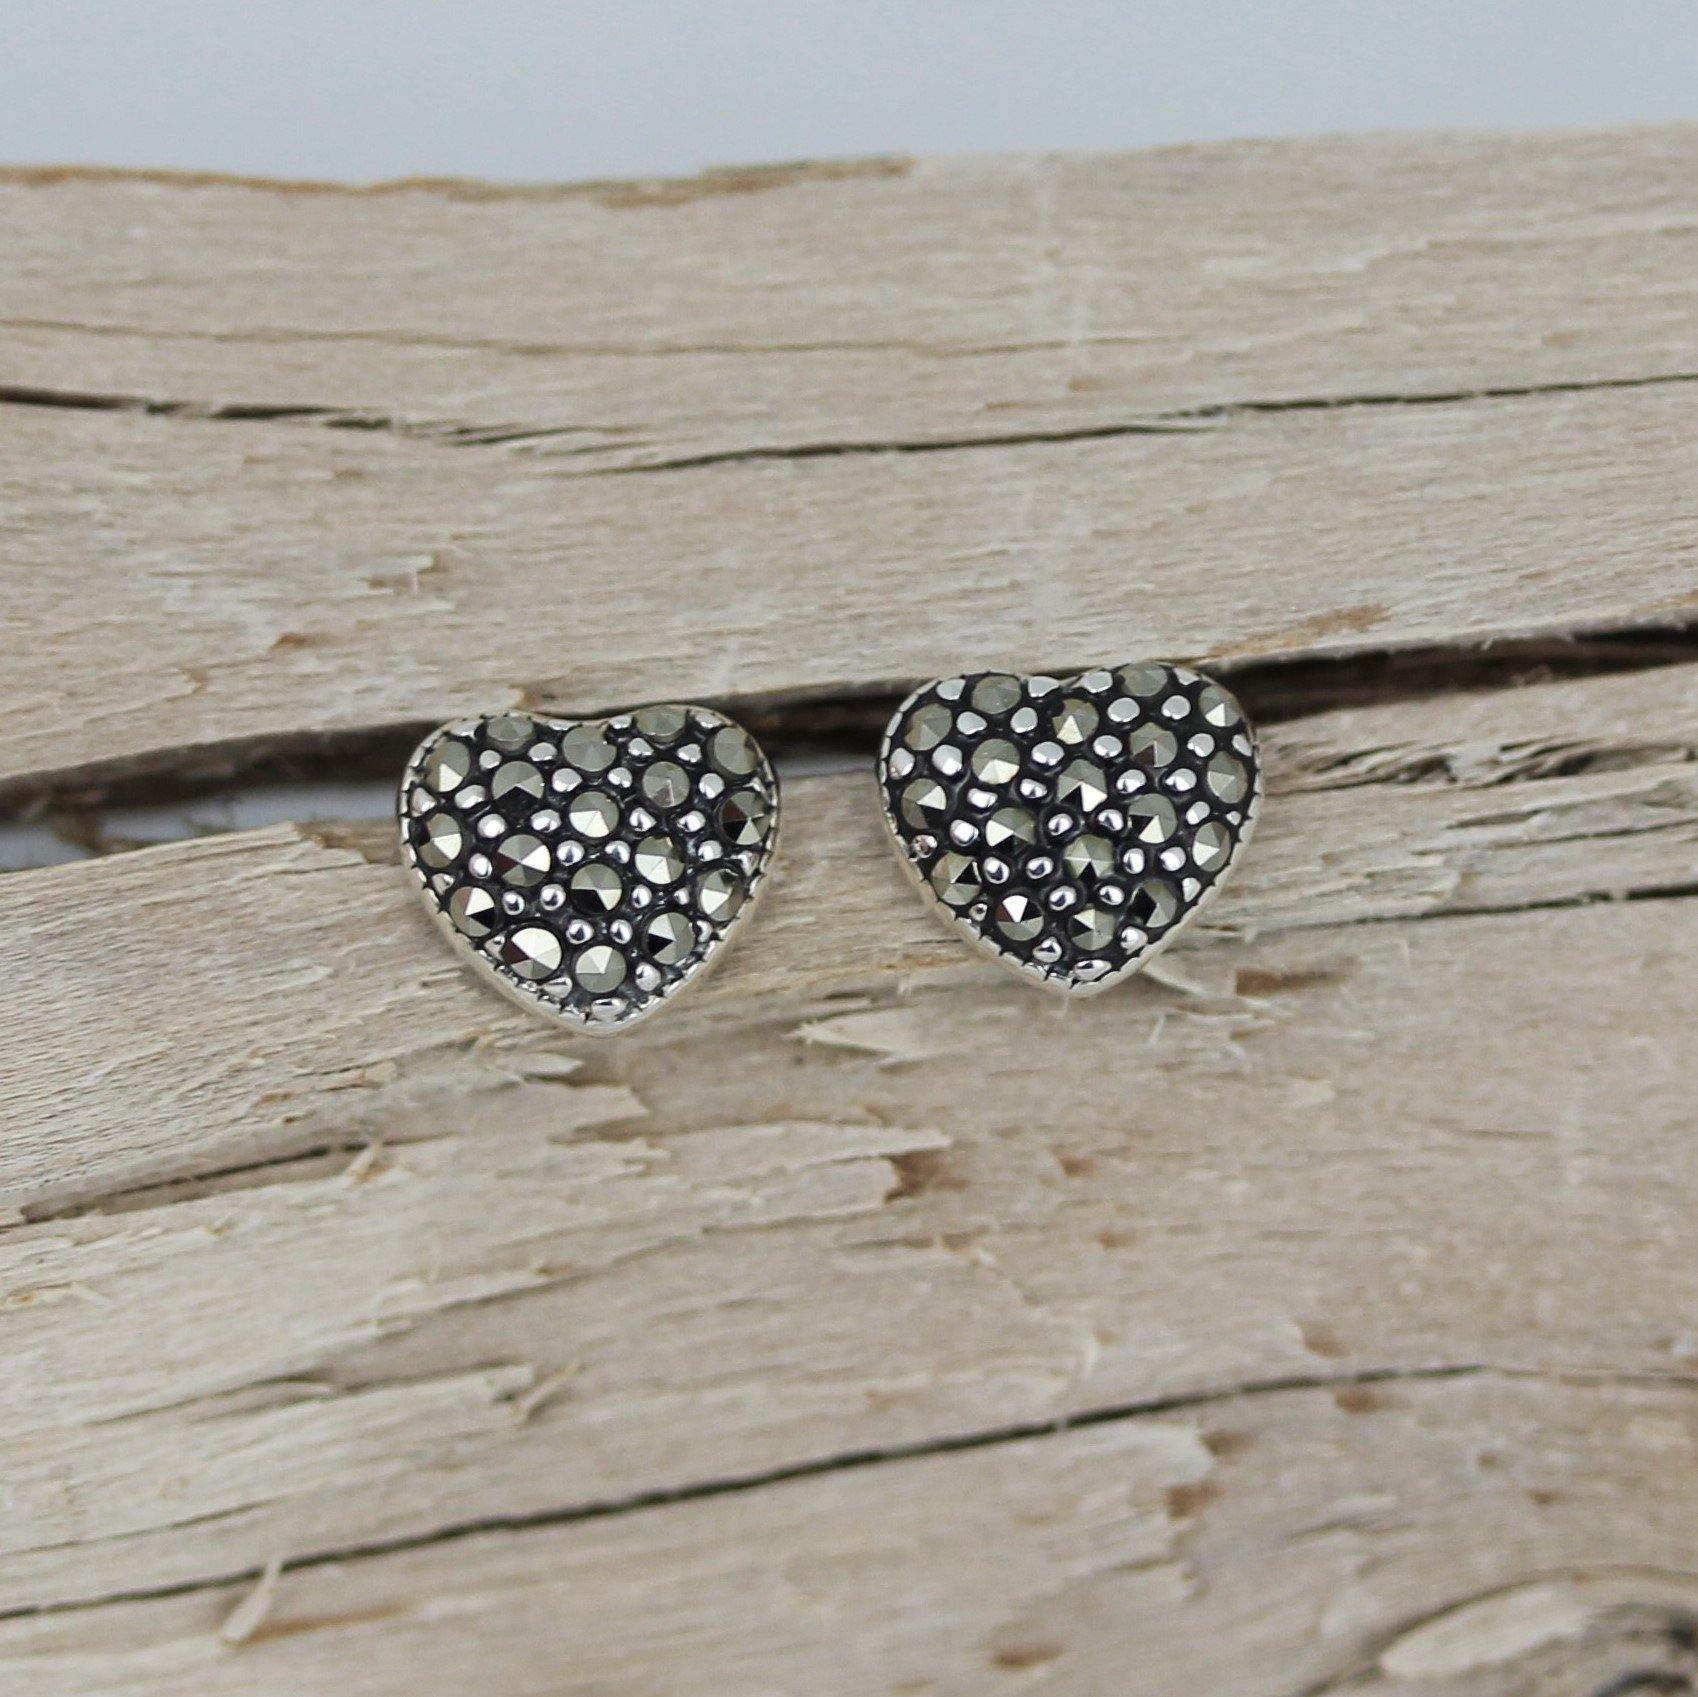 Sterling Silver Marcasite Vintage Style Small Heart Stud Earrings - STERLING SILVER DESIGNS